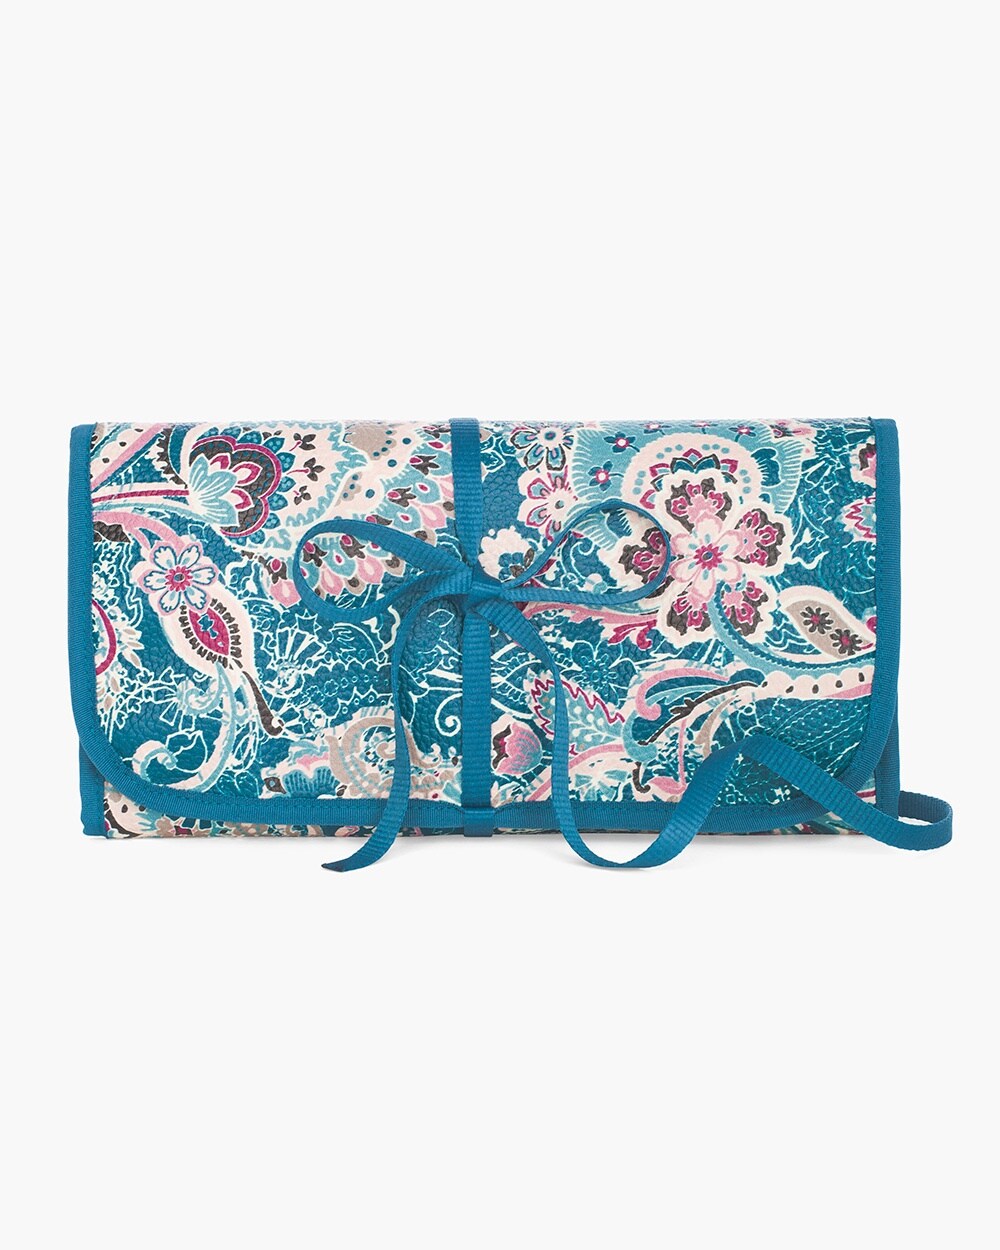 Floral Lace-Print Travel Roll Case